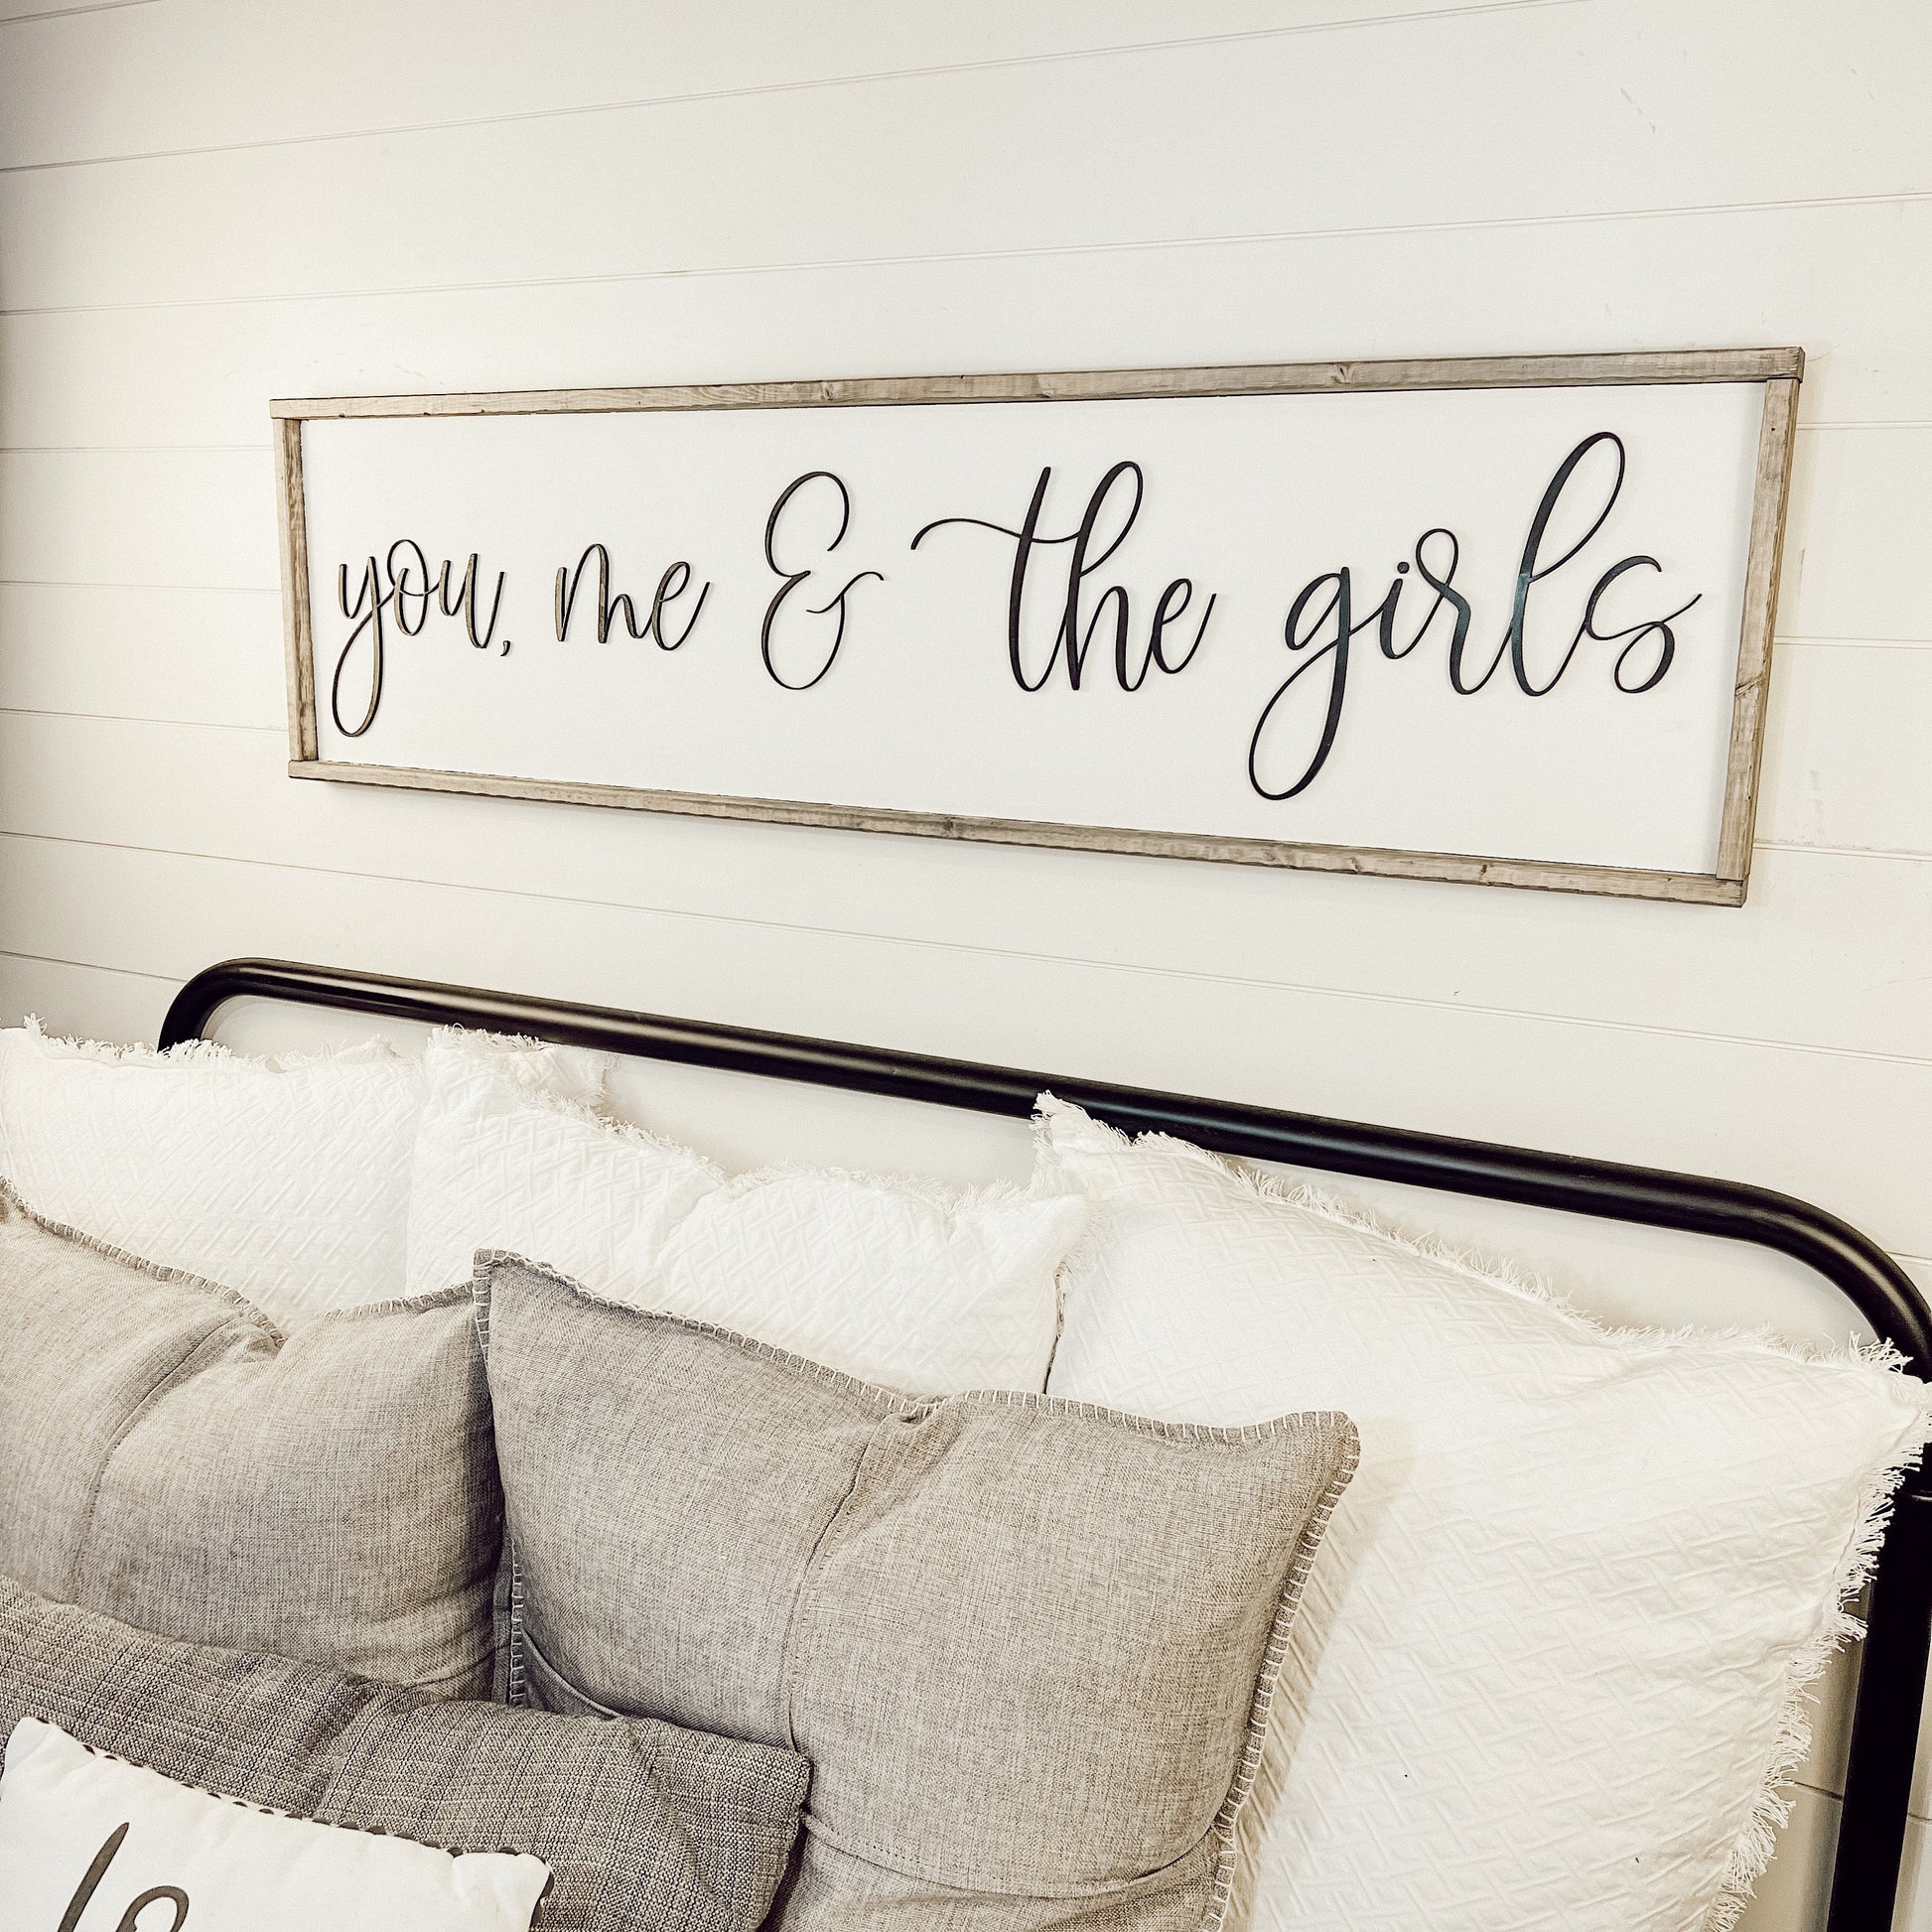 you, me & the girls - above over the bed sign - master bedroom wall art [FREE SHIPPING!]